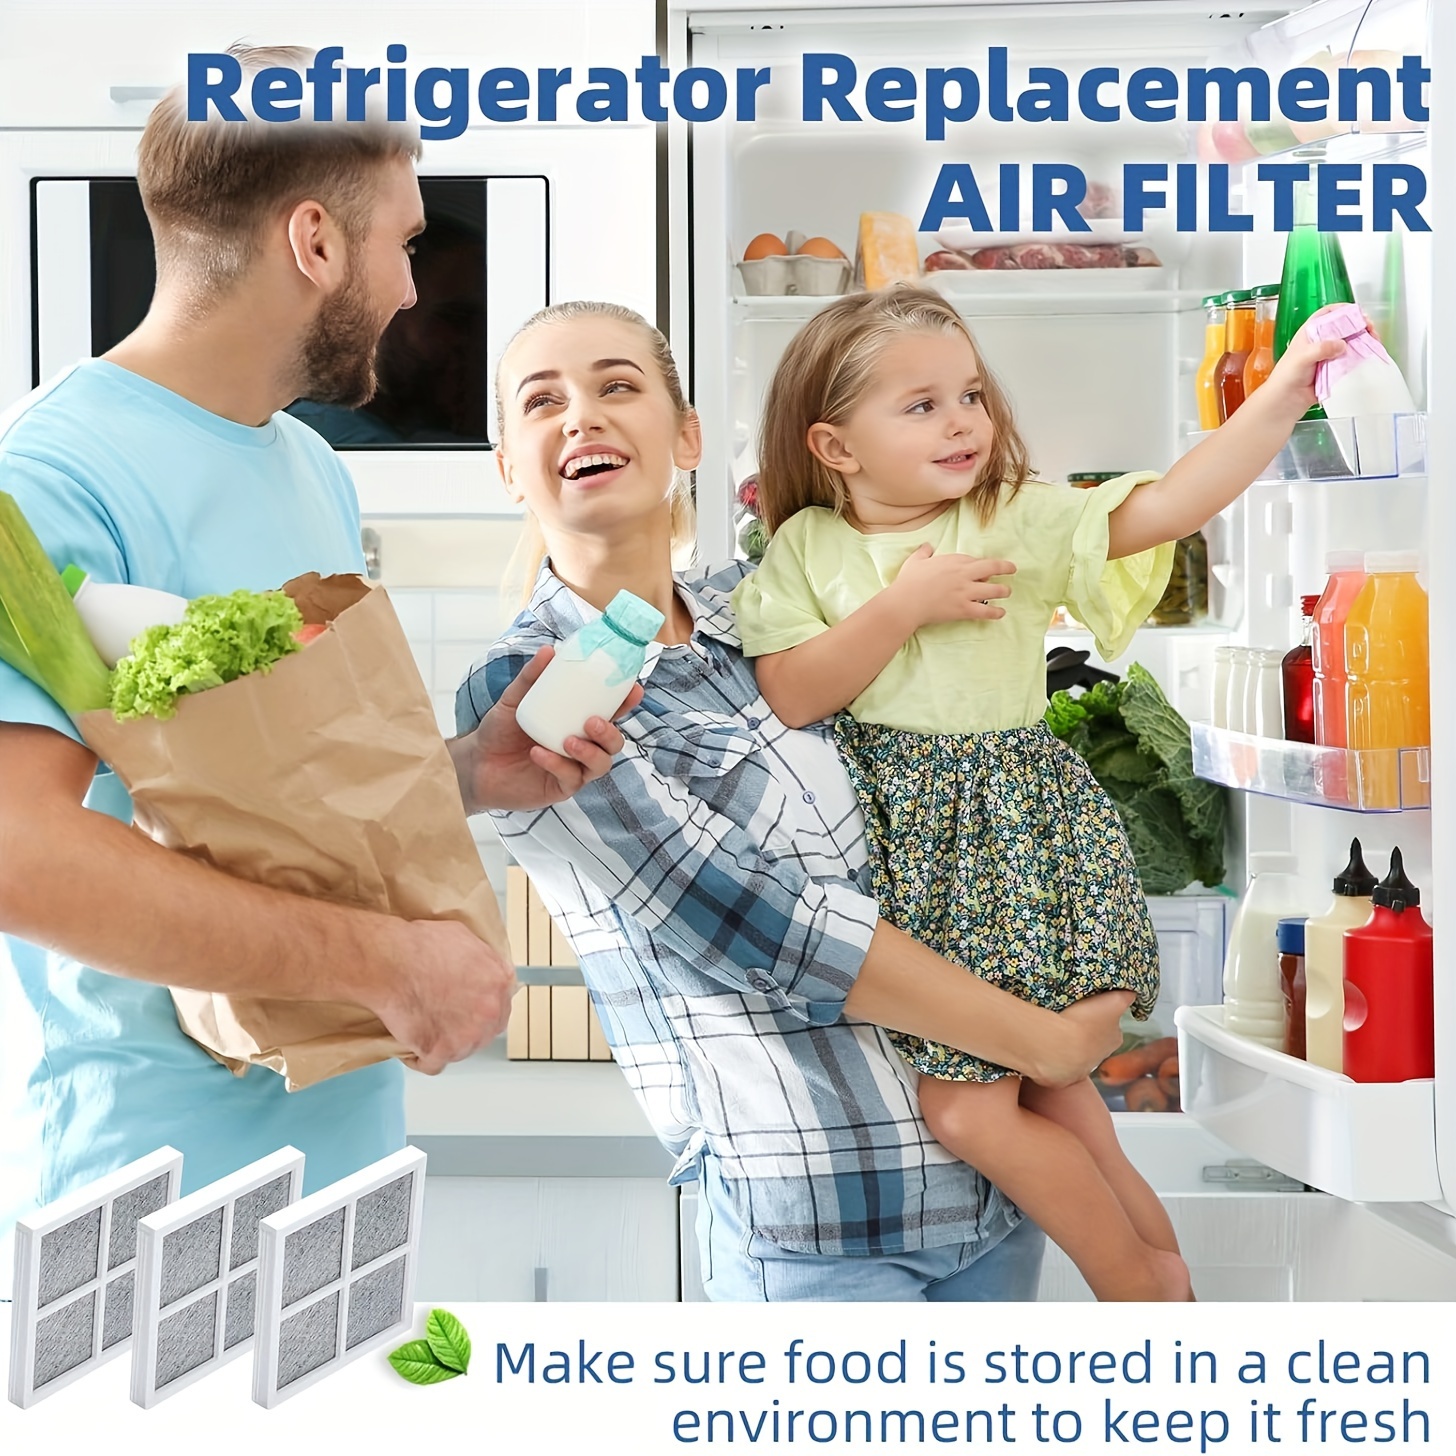 Replacement Fresh Air Filter for LG Refrigerator Air Filter Replacement and  Kenmore Elite Refrigerator Air Filter - LG LT120F, Kenmore 46-9918 469918